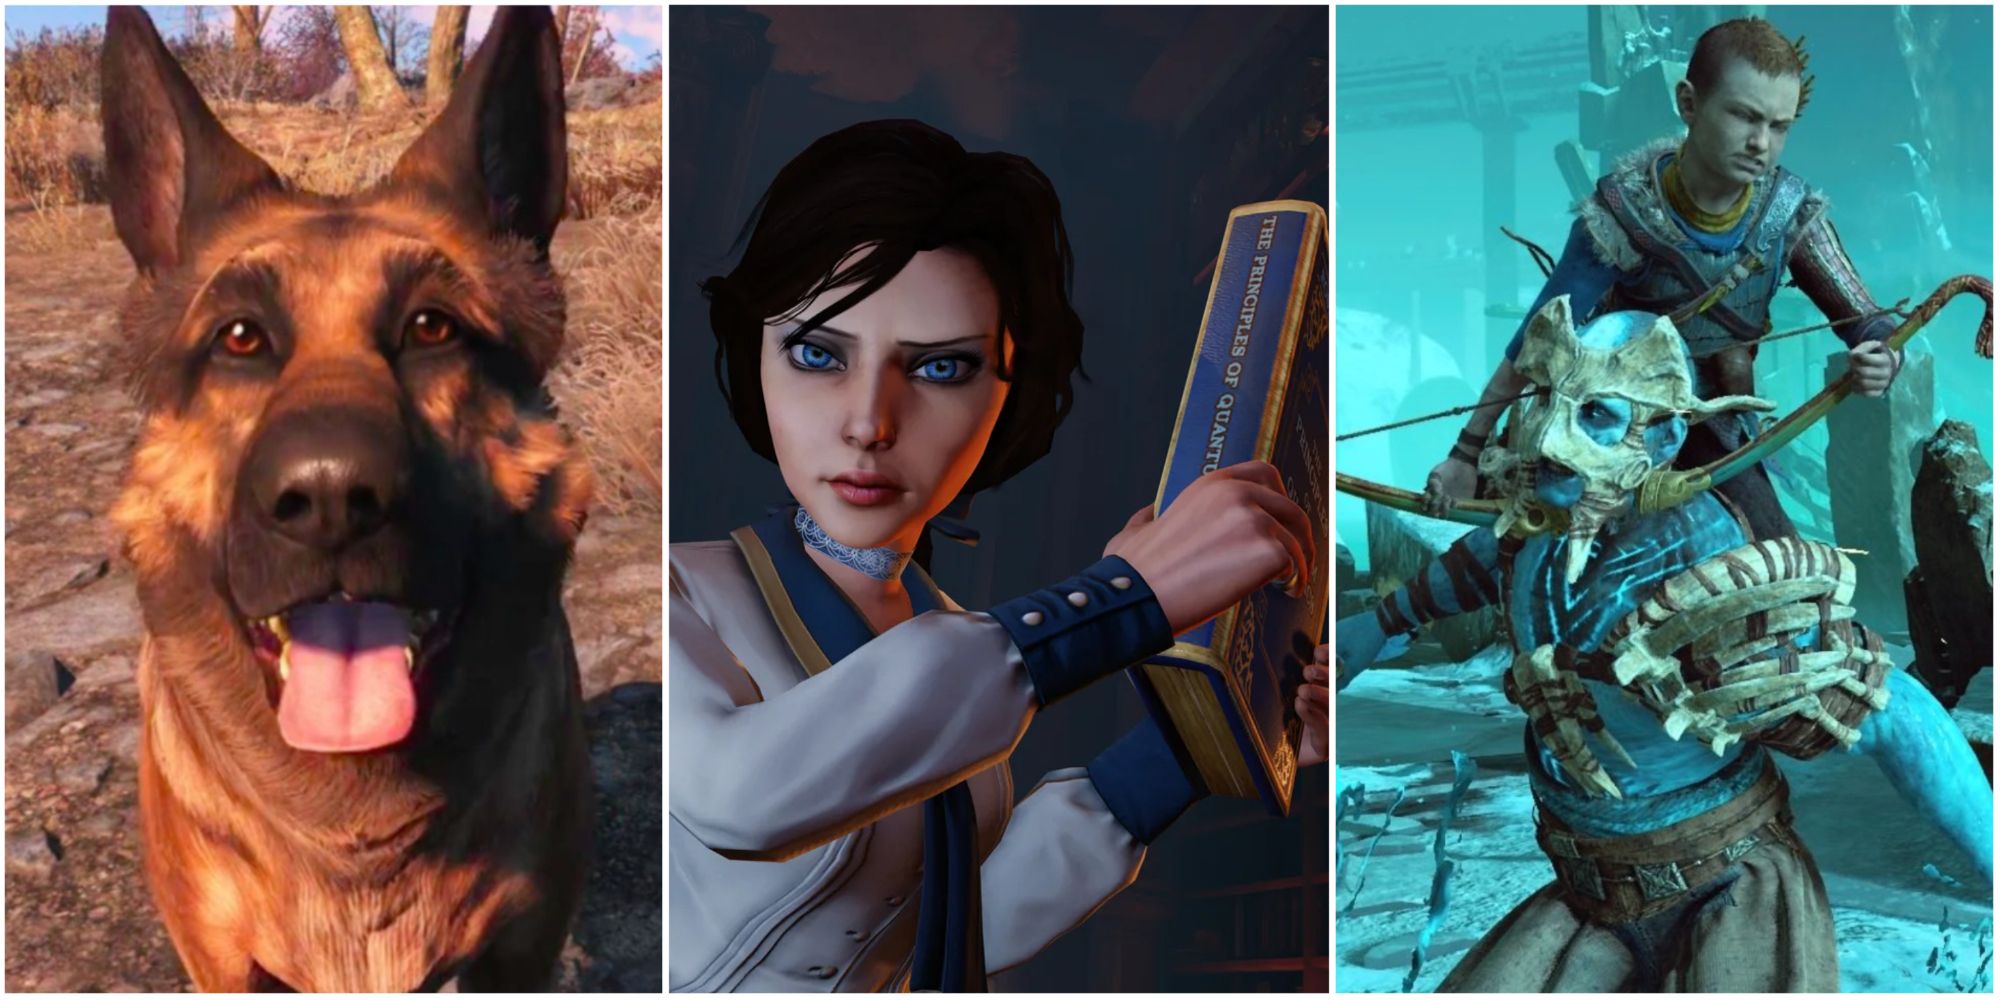 Collage of the Most Helpful NPCs featuring Dogmeat from Fallout, Elizabeth from Bioshock: Infinite and Atreus from God of War